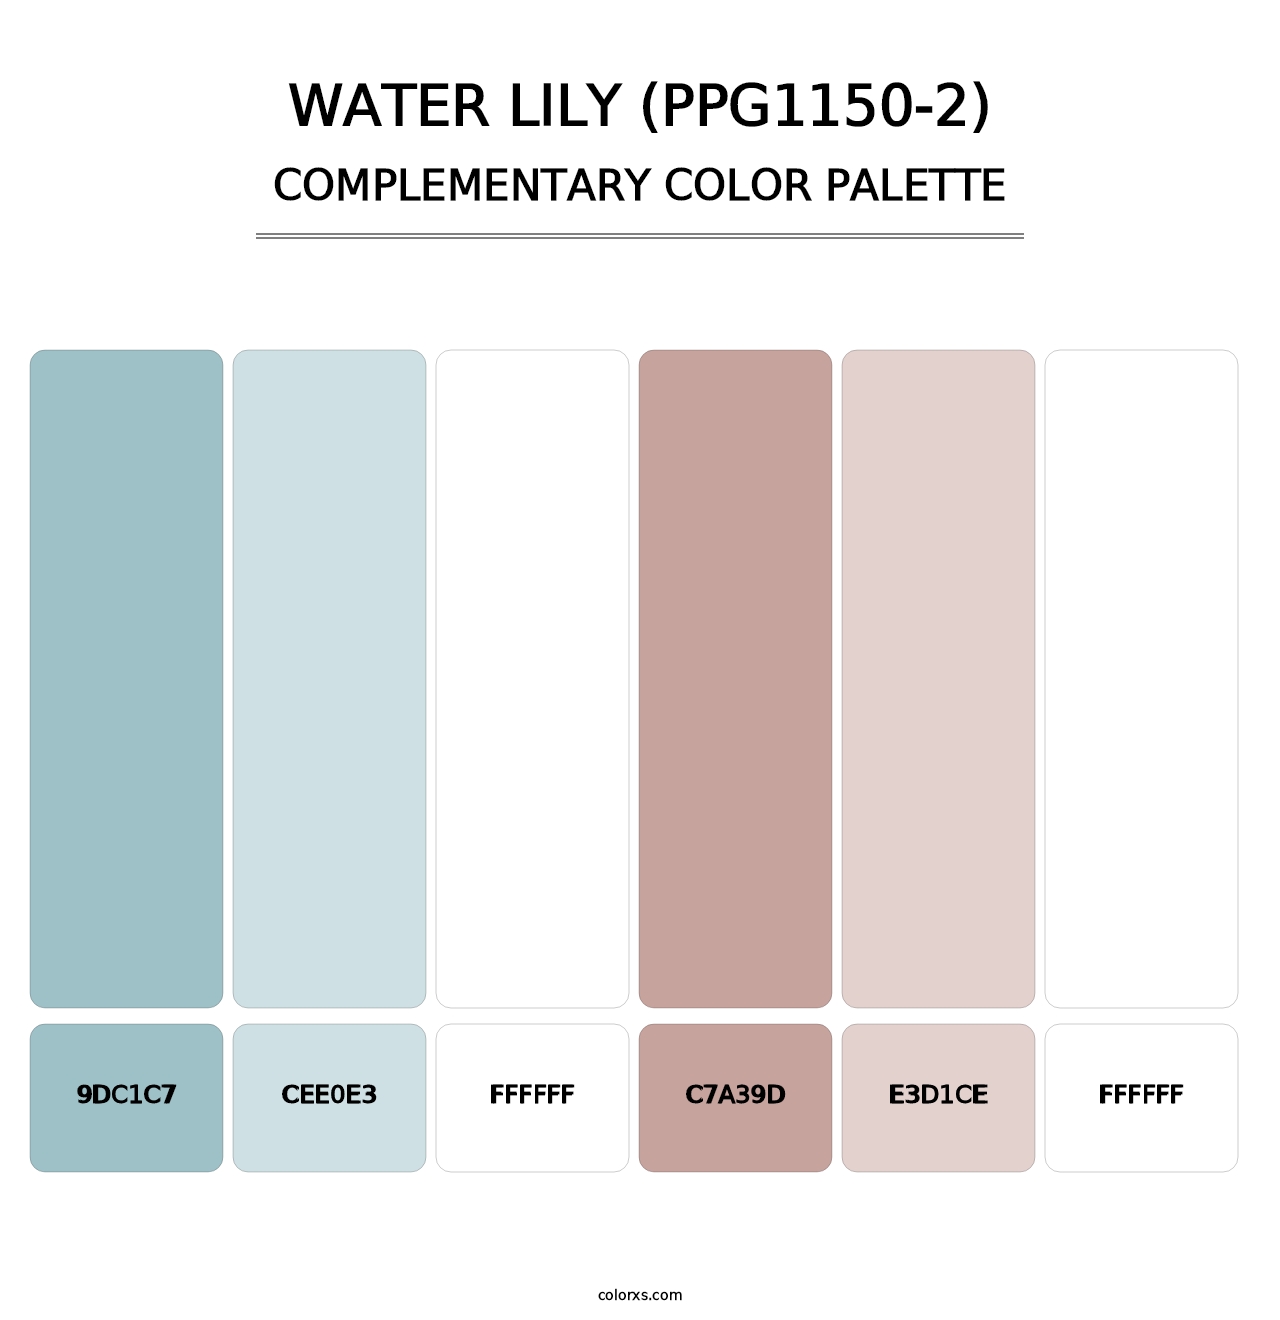 Water Lily (PPG1150-2) - Complementary Color Palette